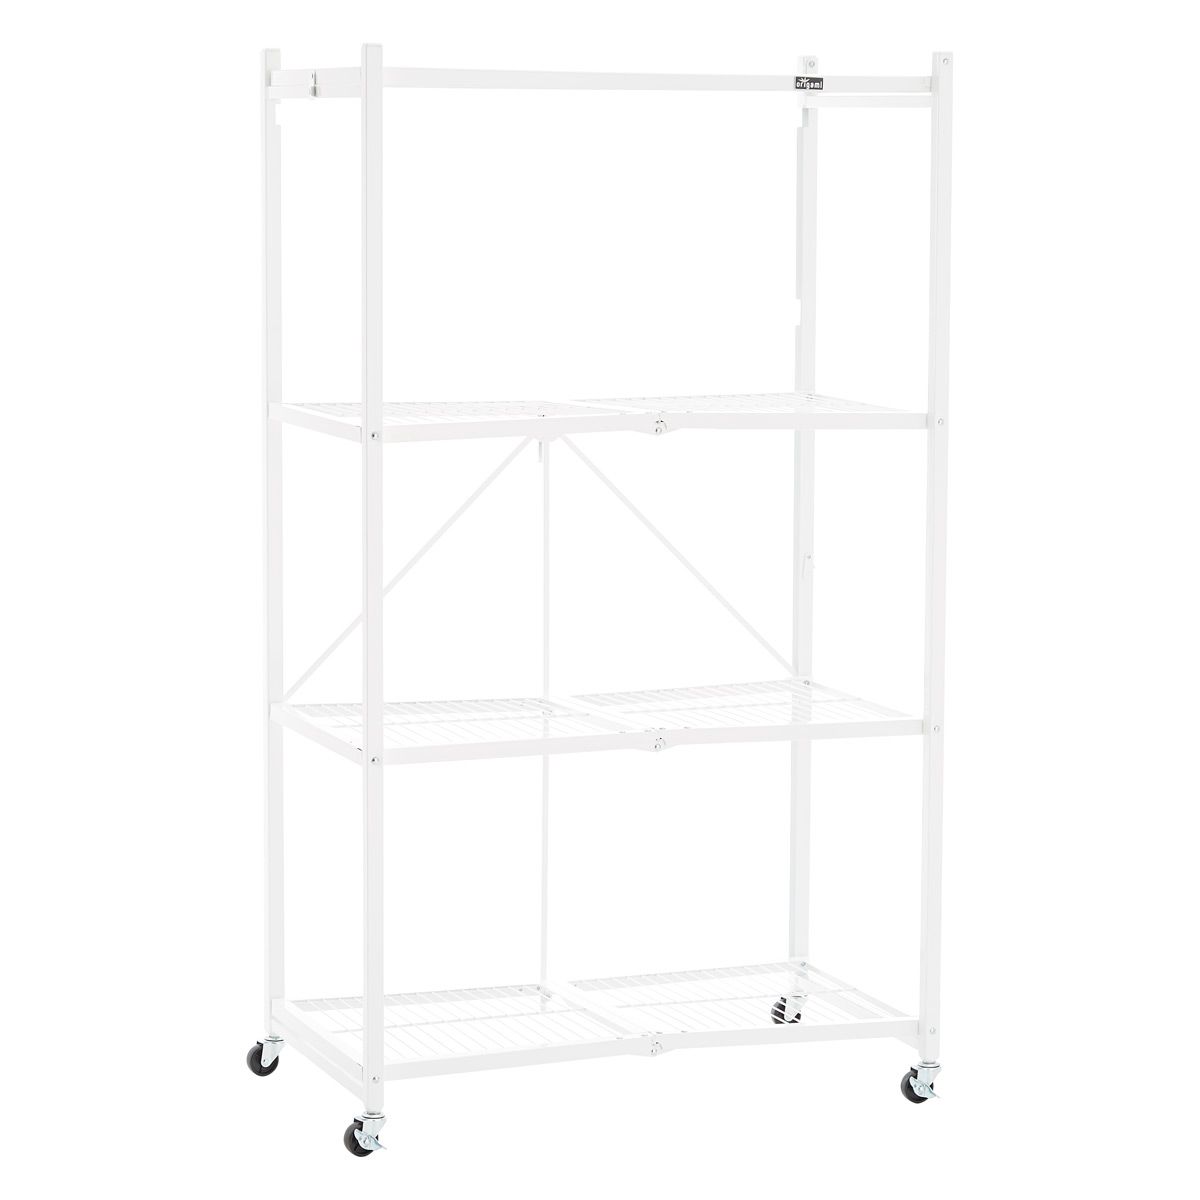 Origami~ 4-Shelf Folding Rack | The Container Store